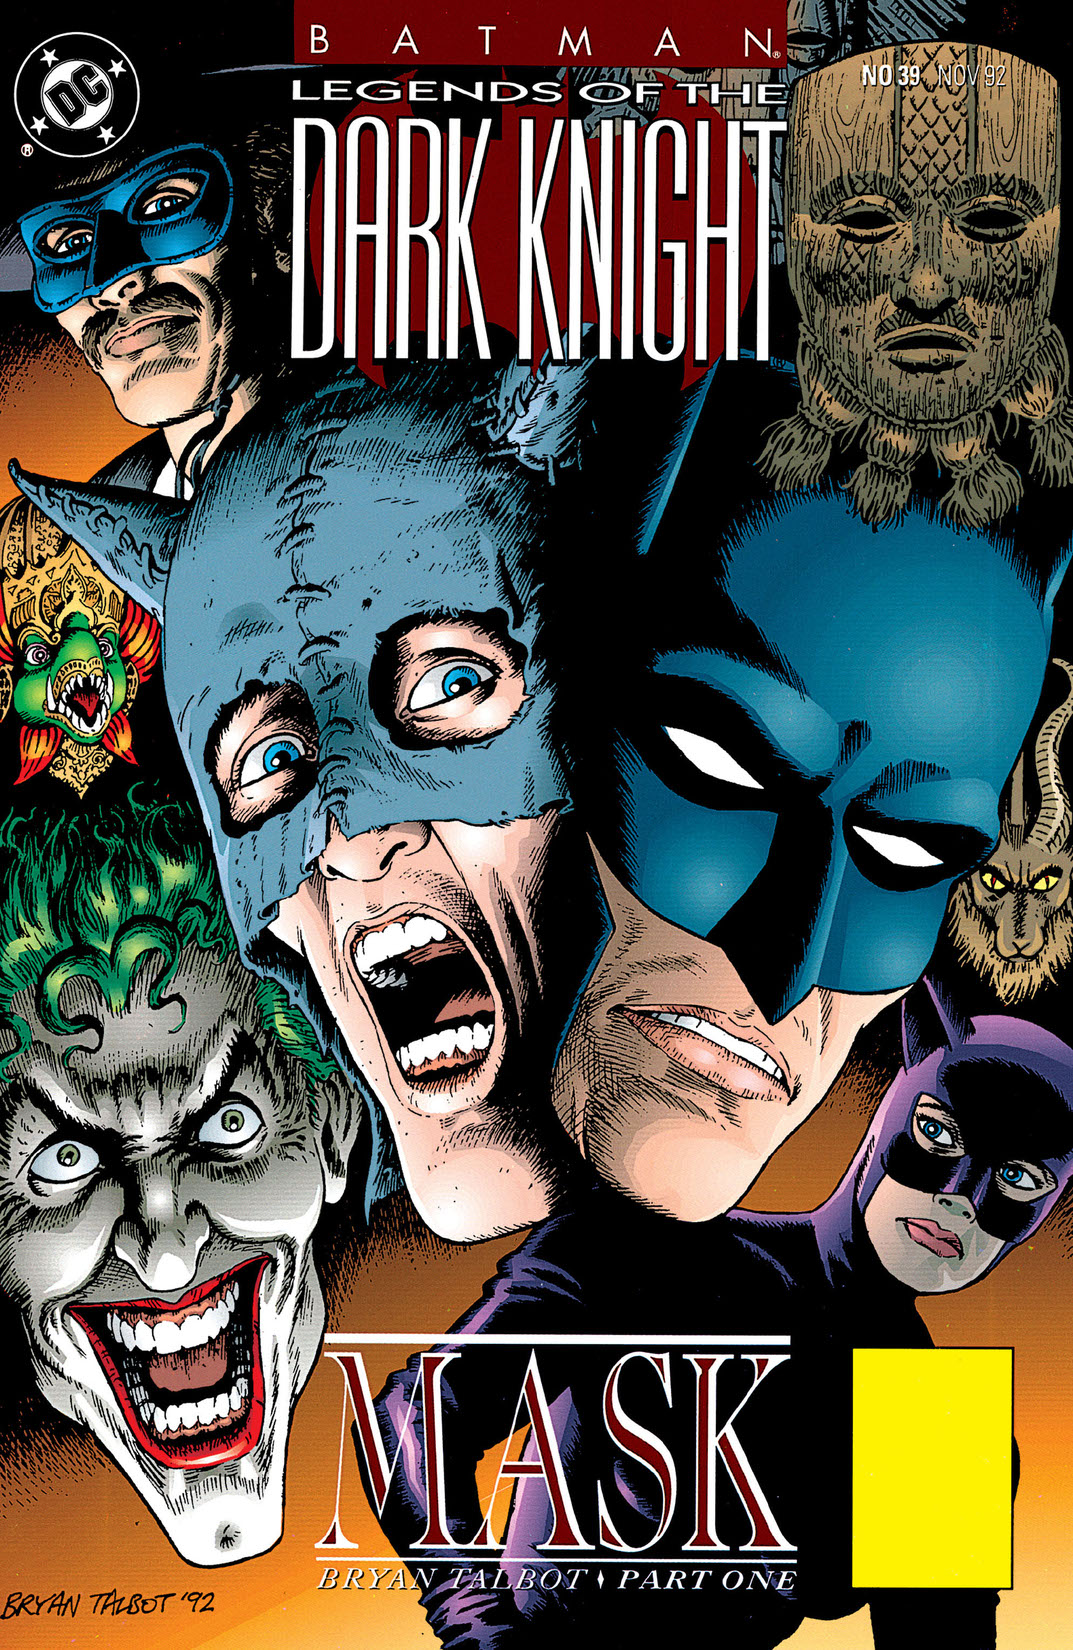 Batman: Legends of the Dark Knight #39 preview images